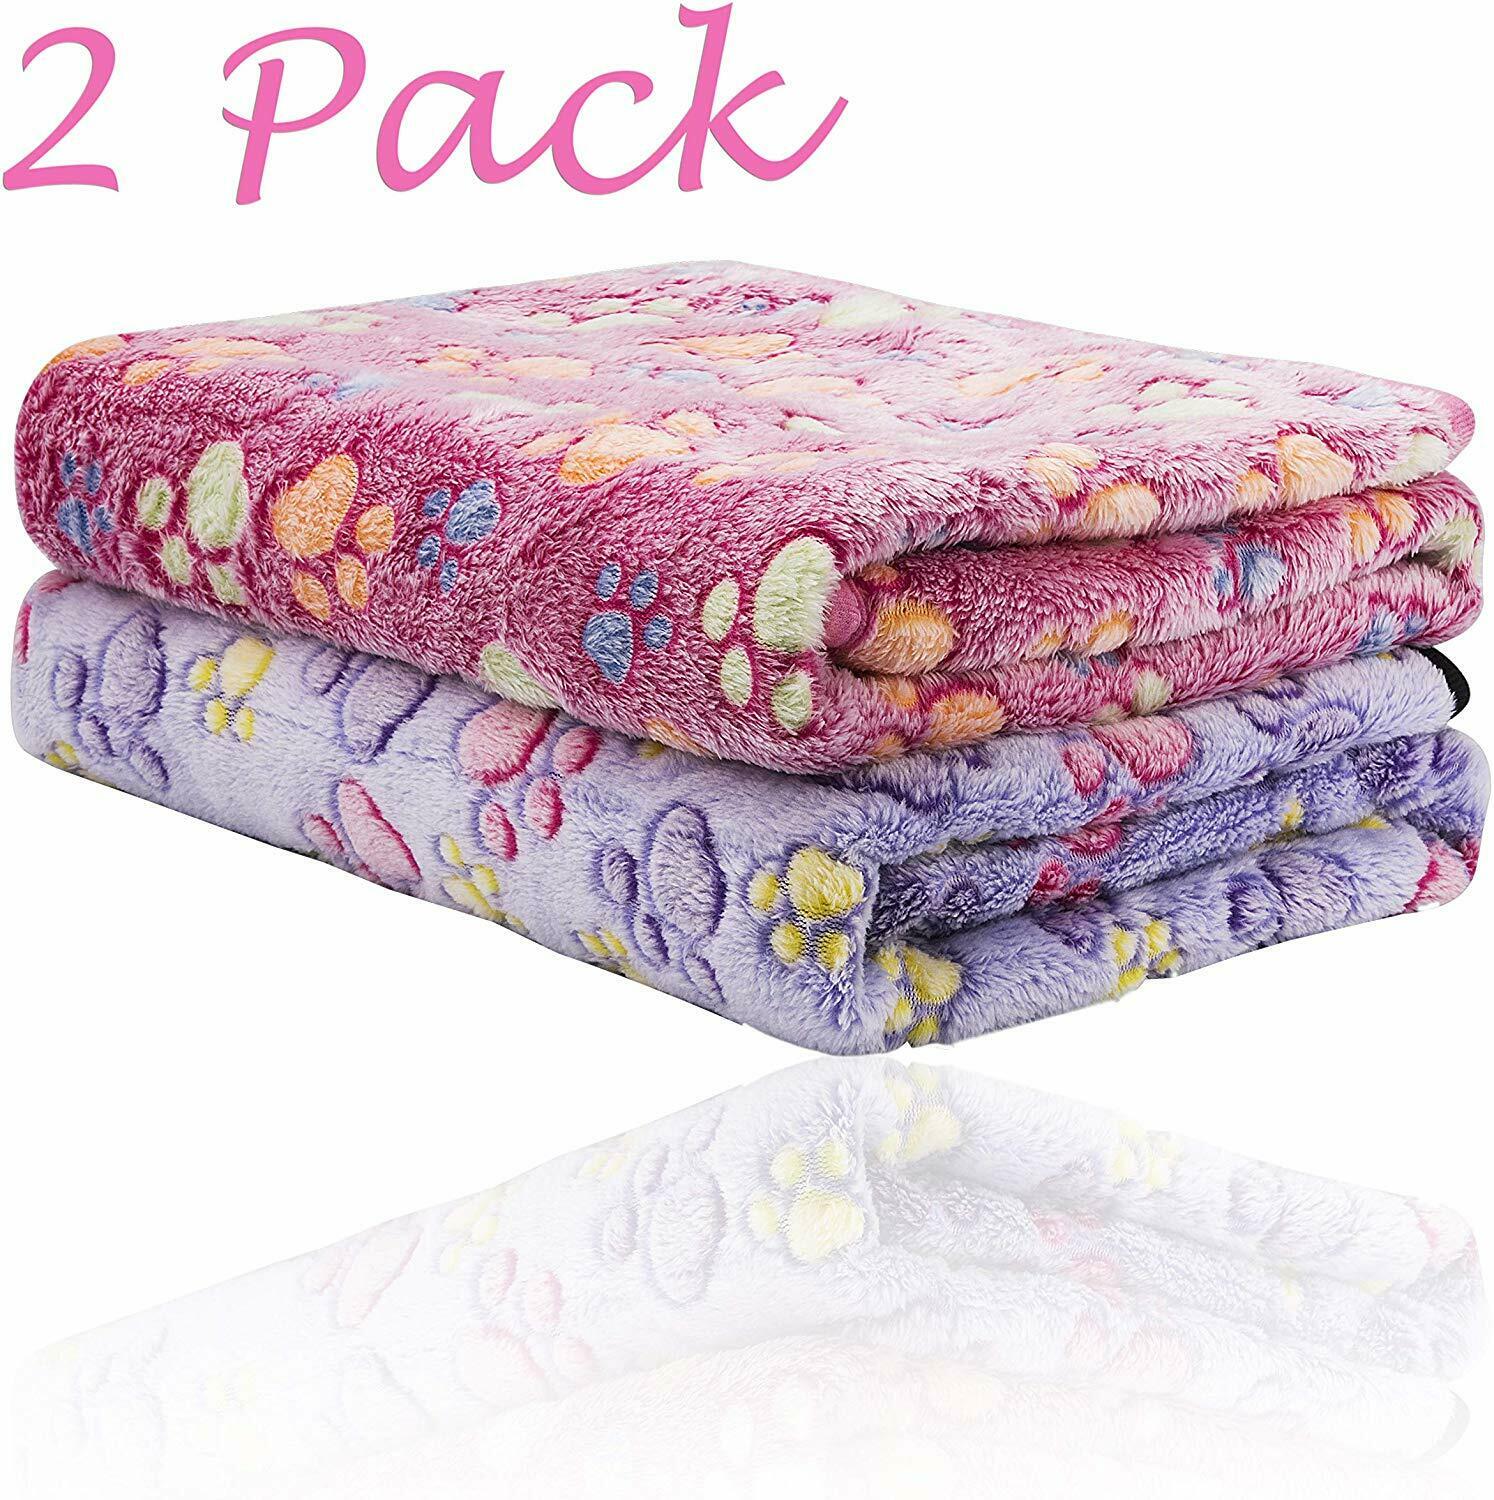 2 Pack Puppy Blanket For Pet Cushion Small Dog Cat Bed Soft Warm Heating Mat